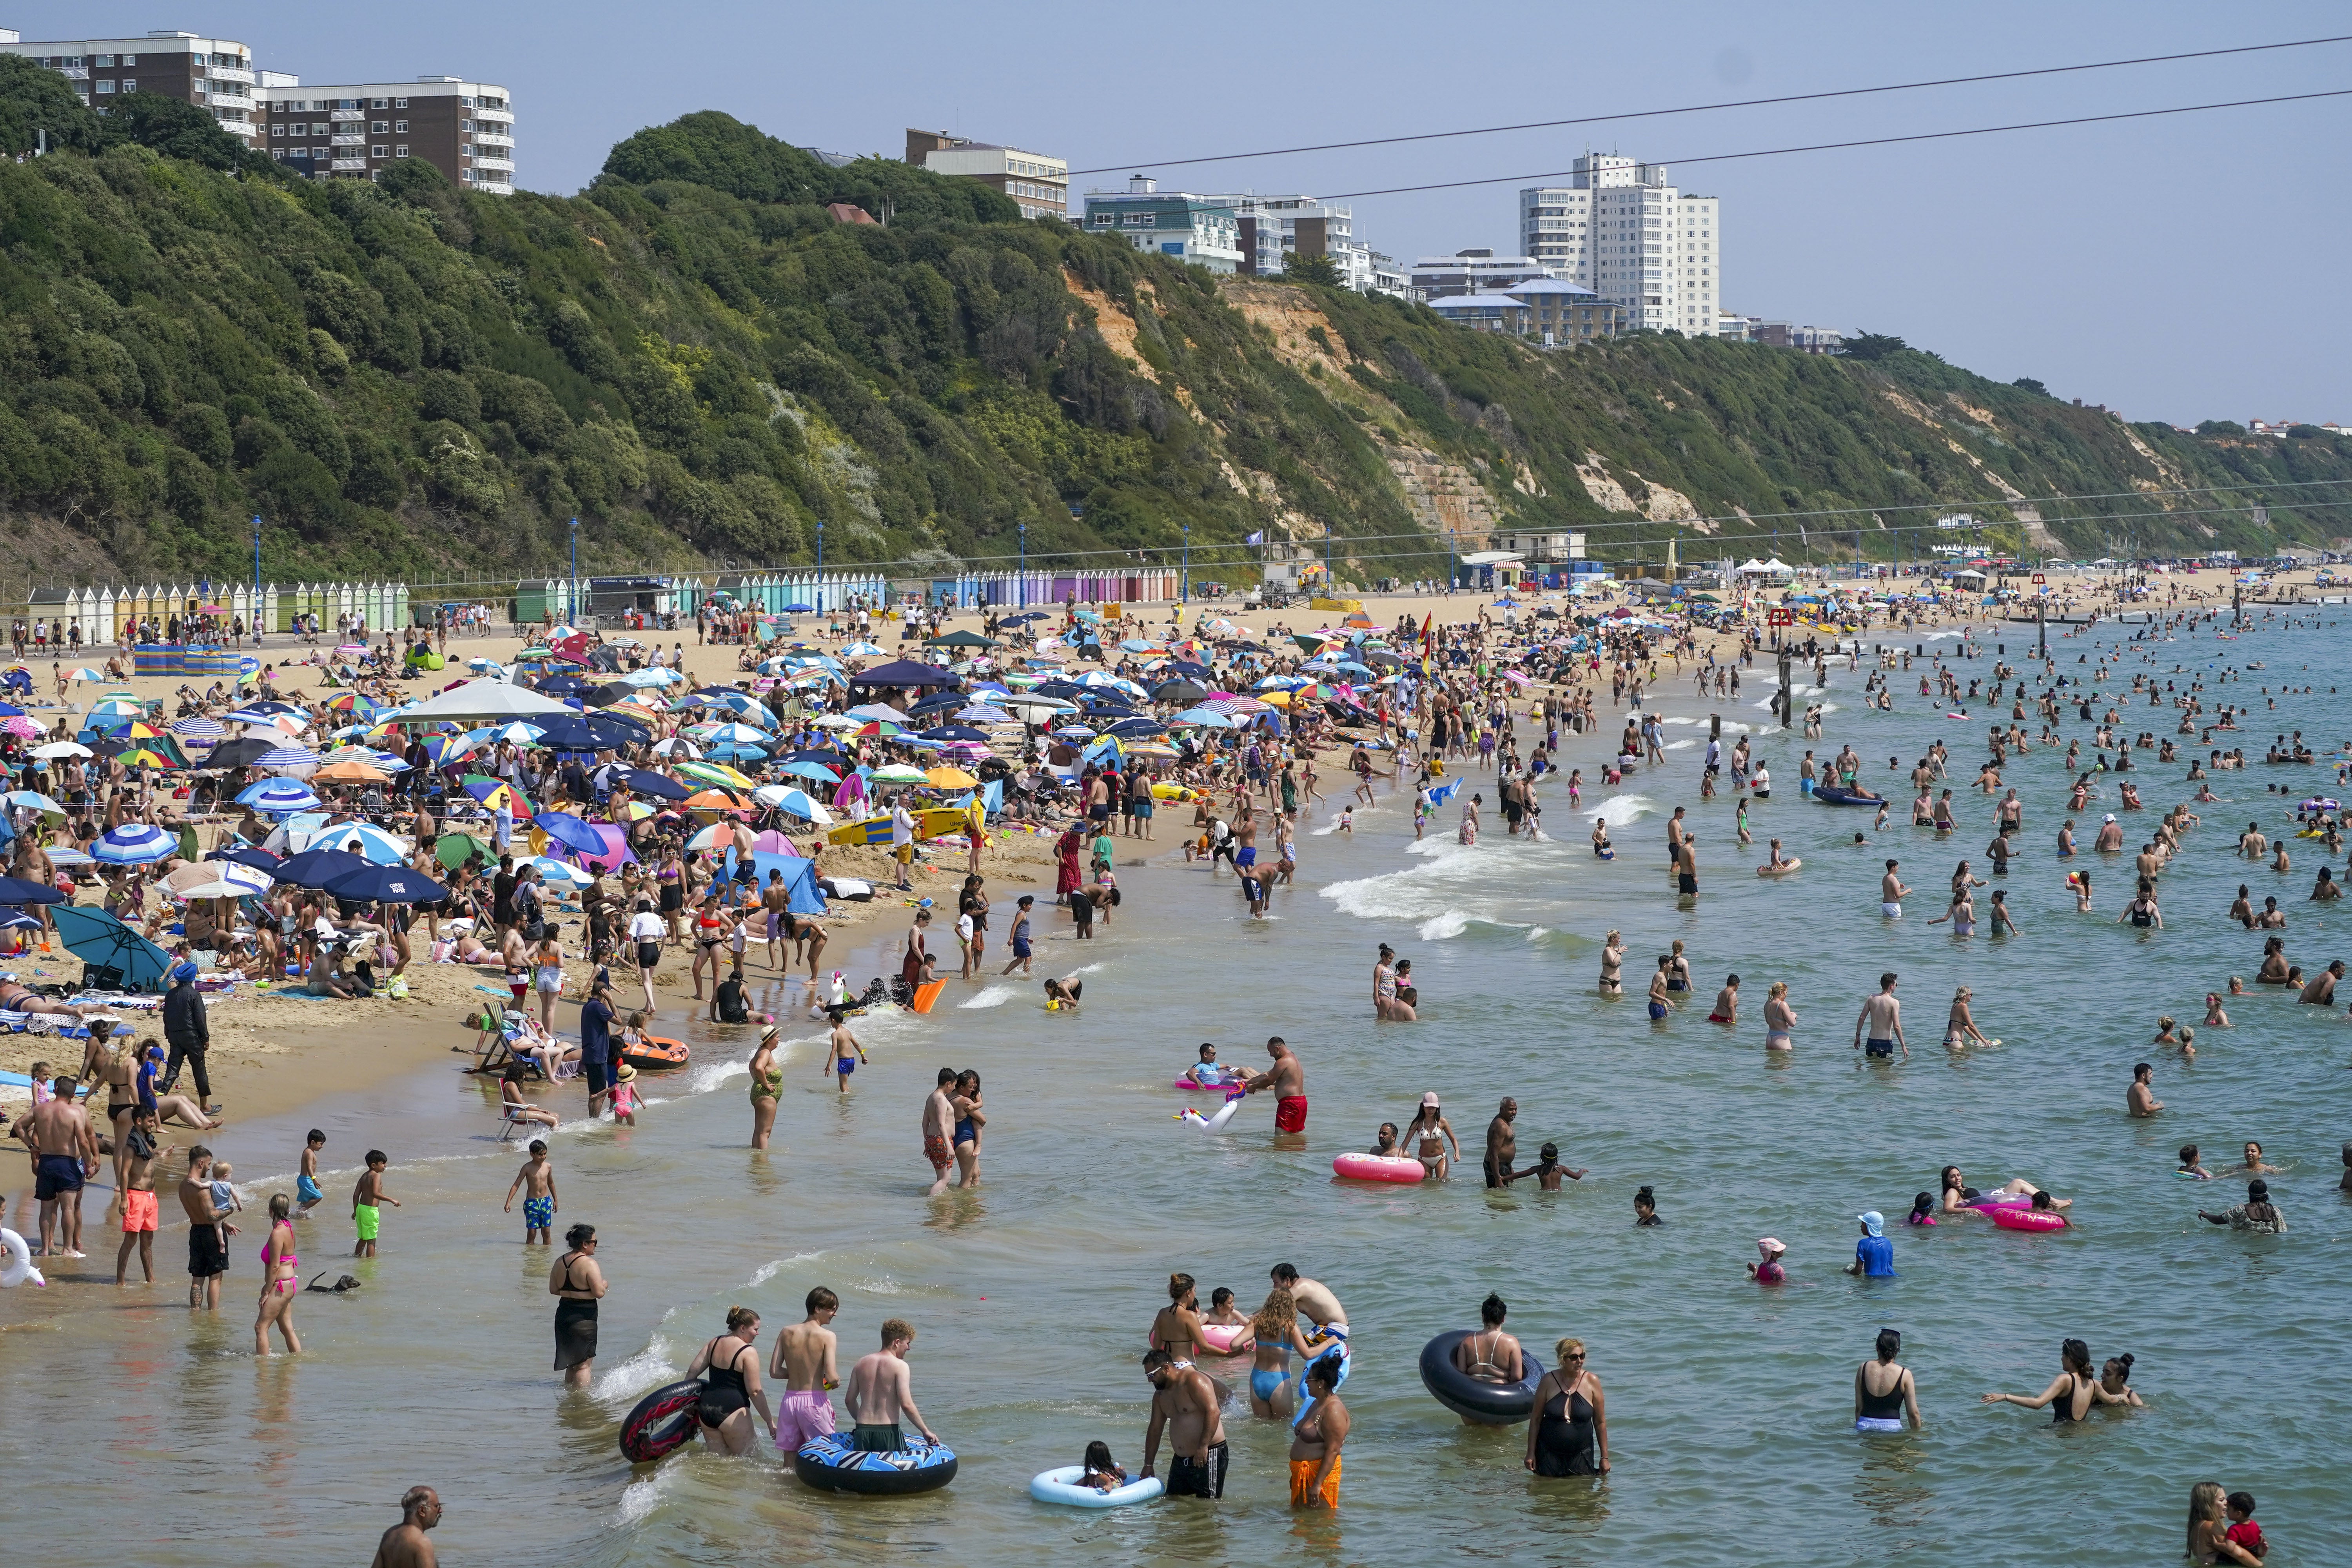 The beach in Bournemouth on July 19 2022, the hottest day ever recorded in the UK (Steve Parsons/PA)